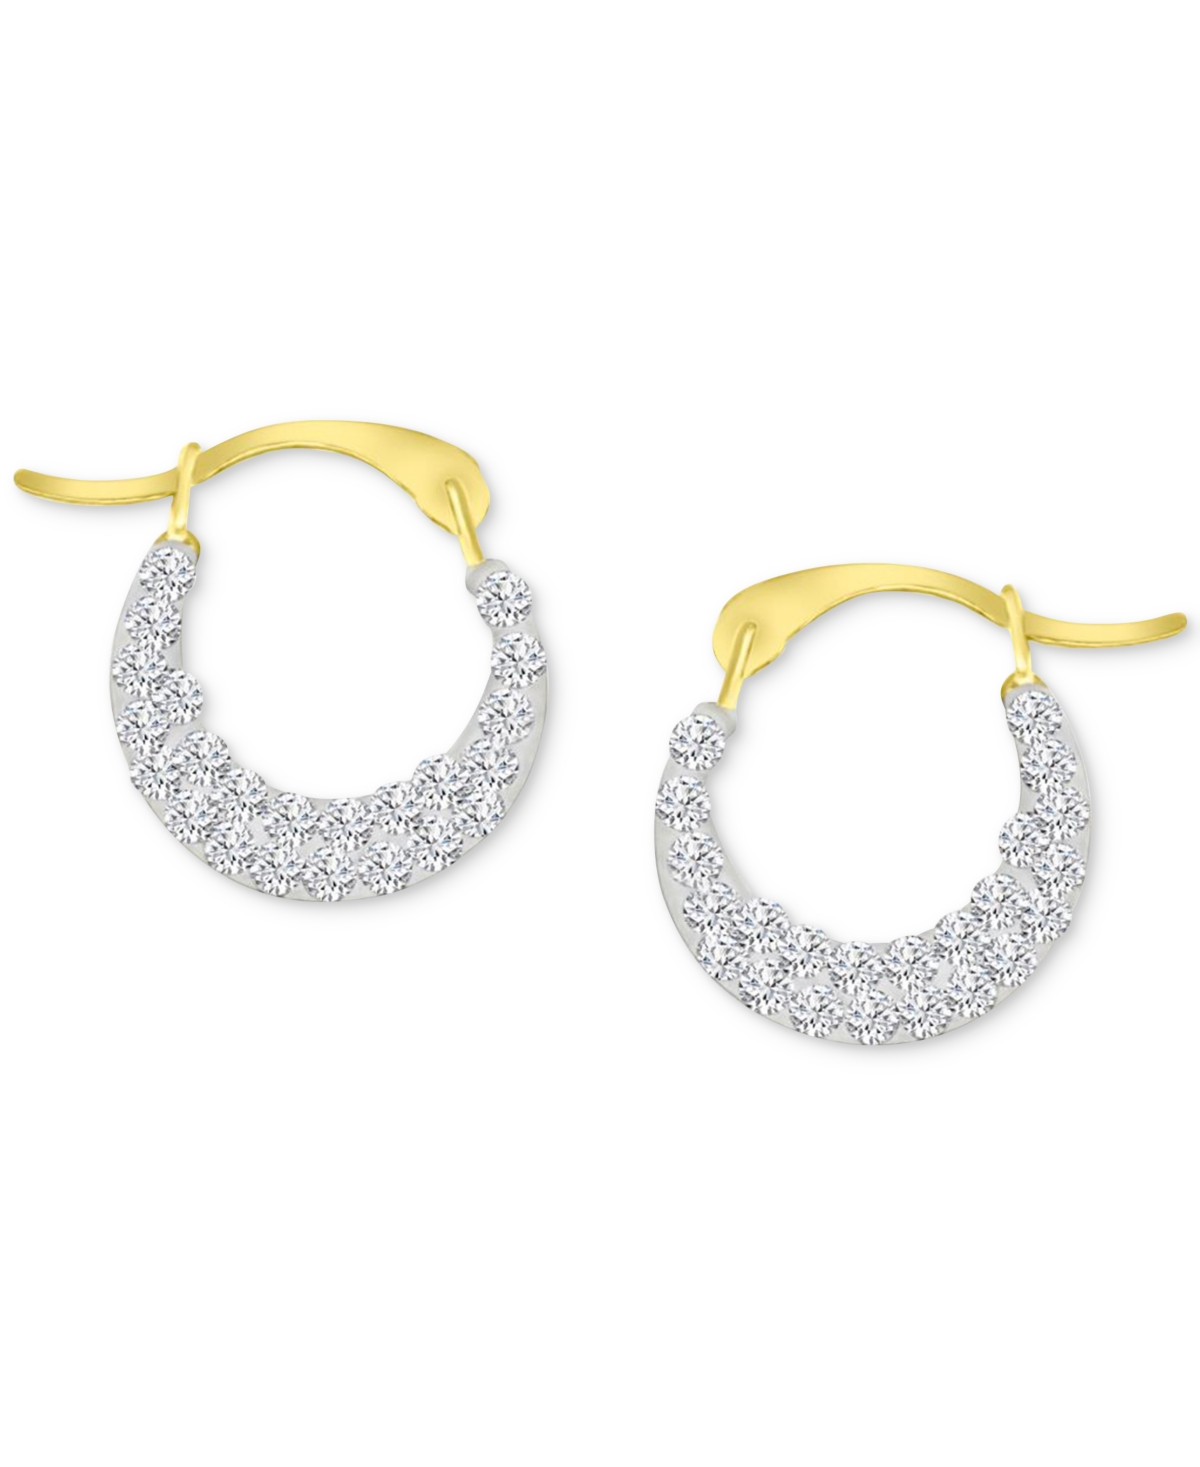 Macy's Crystal Pave Extra Small Hoop Earrings In 10k Gold, 0.45"